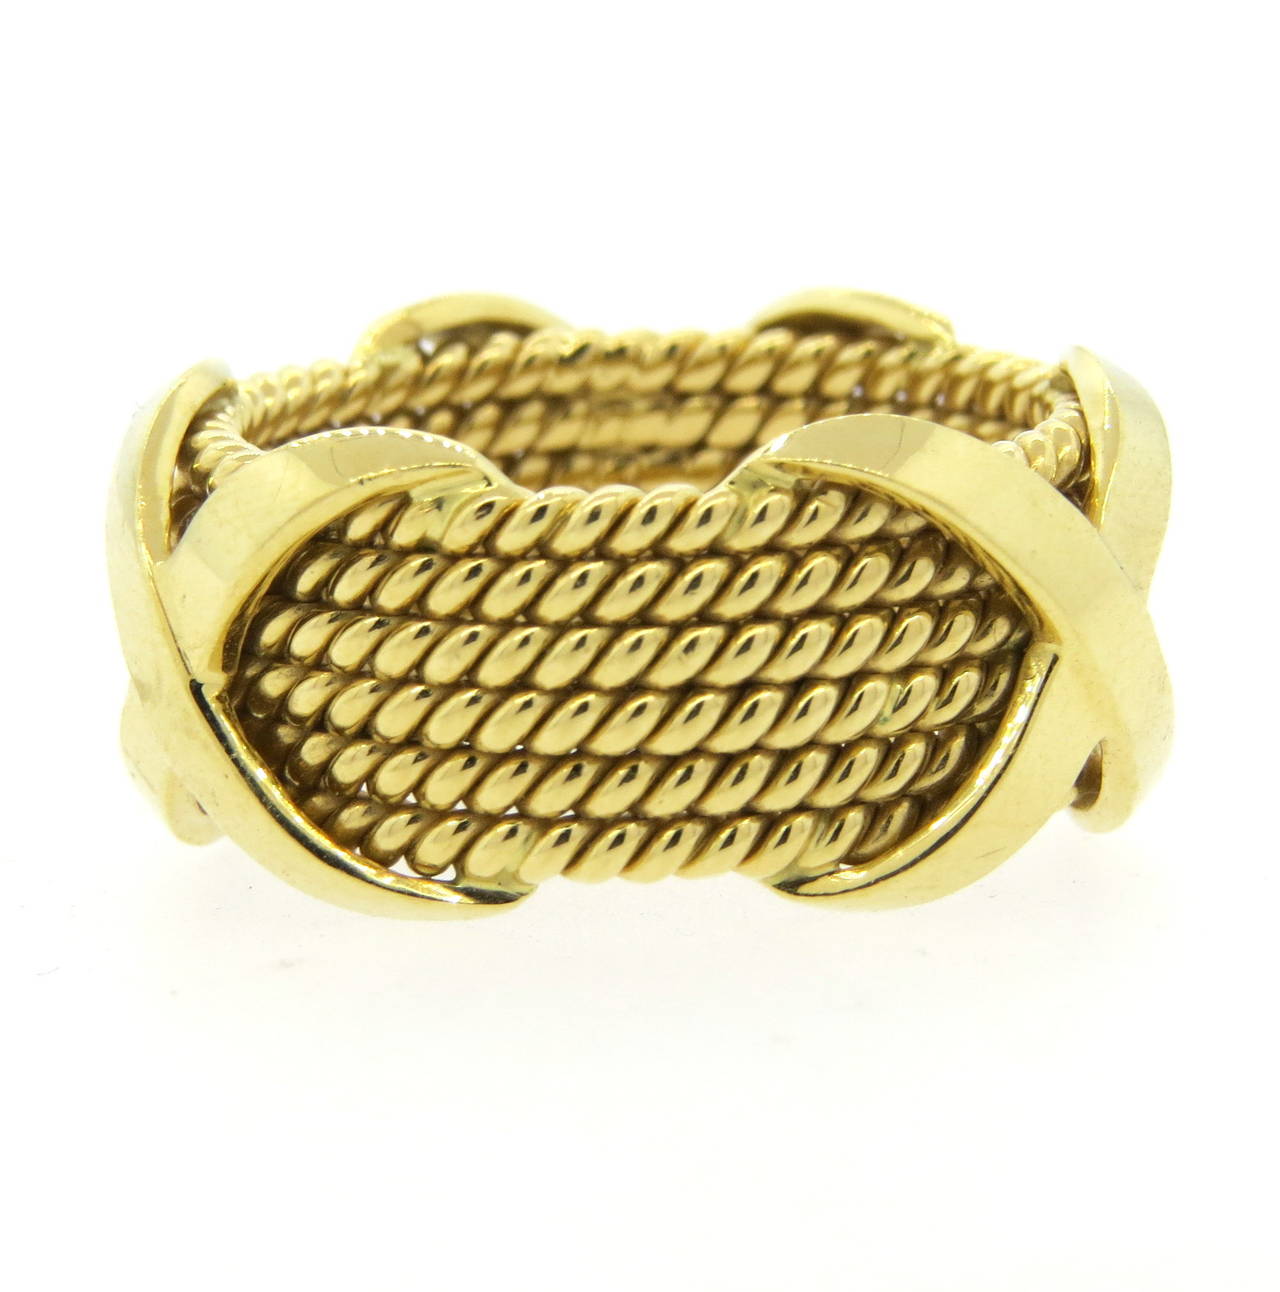 An 18k yellow gold band ring in a rope motif with x stations.  Crafted by Jean Schlumberger for Tiffany & Co., the ring is a size 9.5 and has a width of 12mm.  The ring weighs 16.4 grams.  Marked Tiffany & Co, Schlumberger Studios, 750